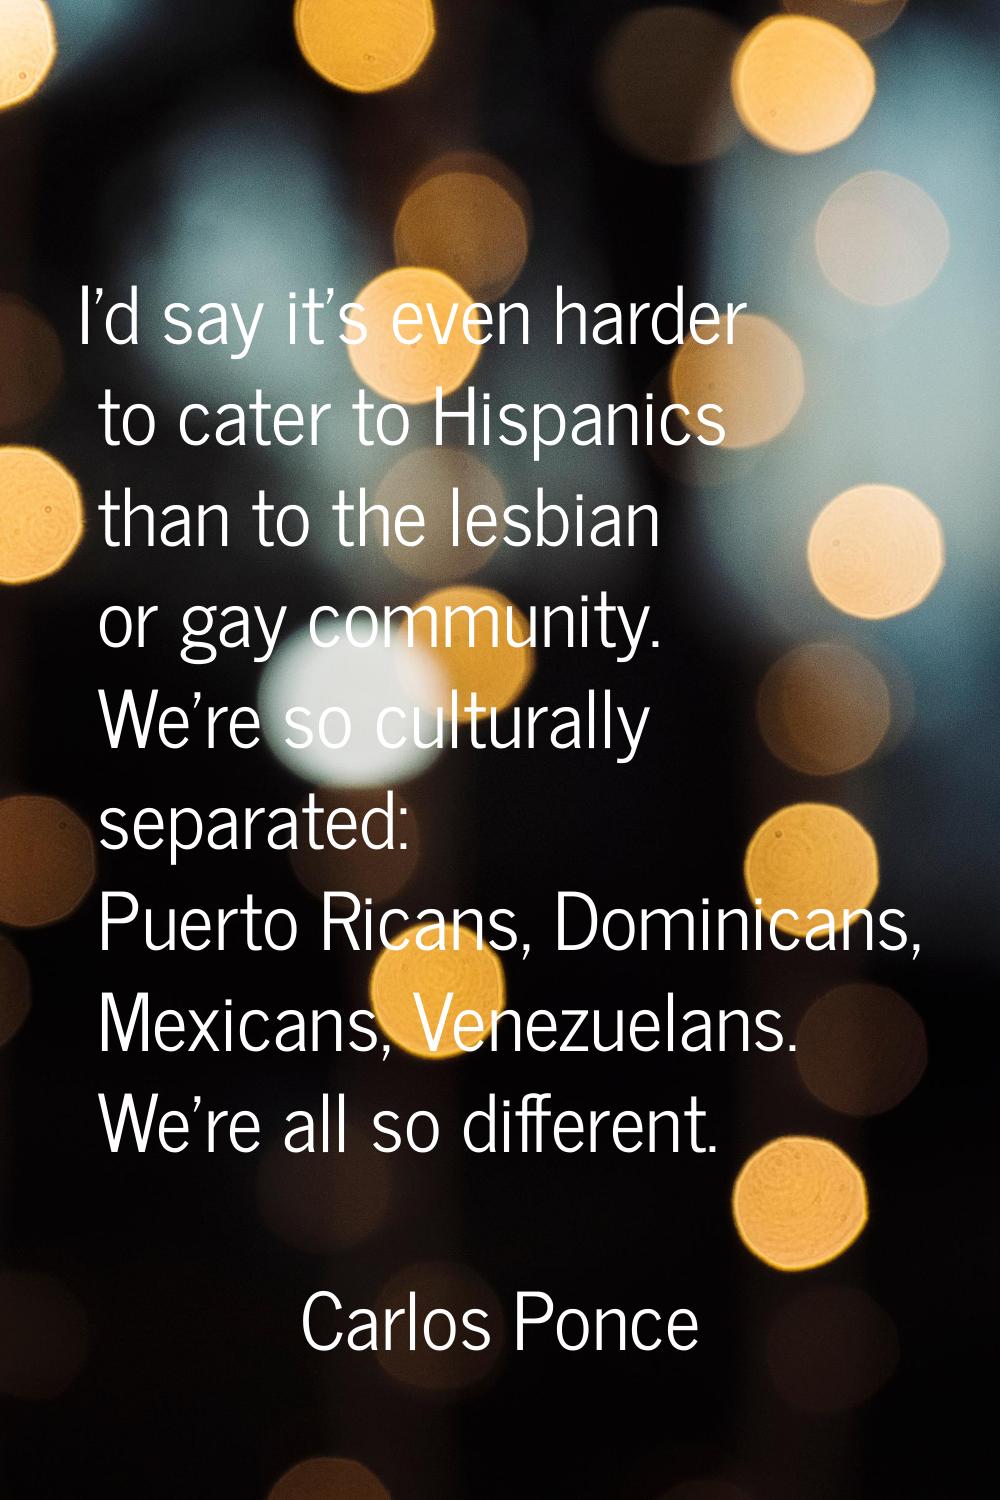 I'd say it's even harder to cater to Hispanics than to the lesbian or gay community. We're so cultu